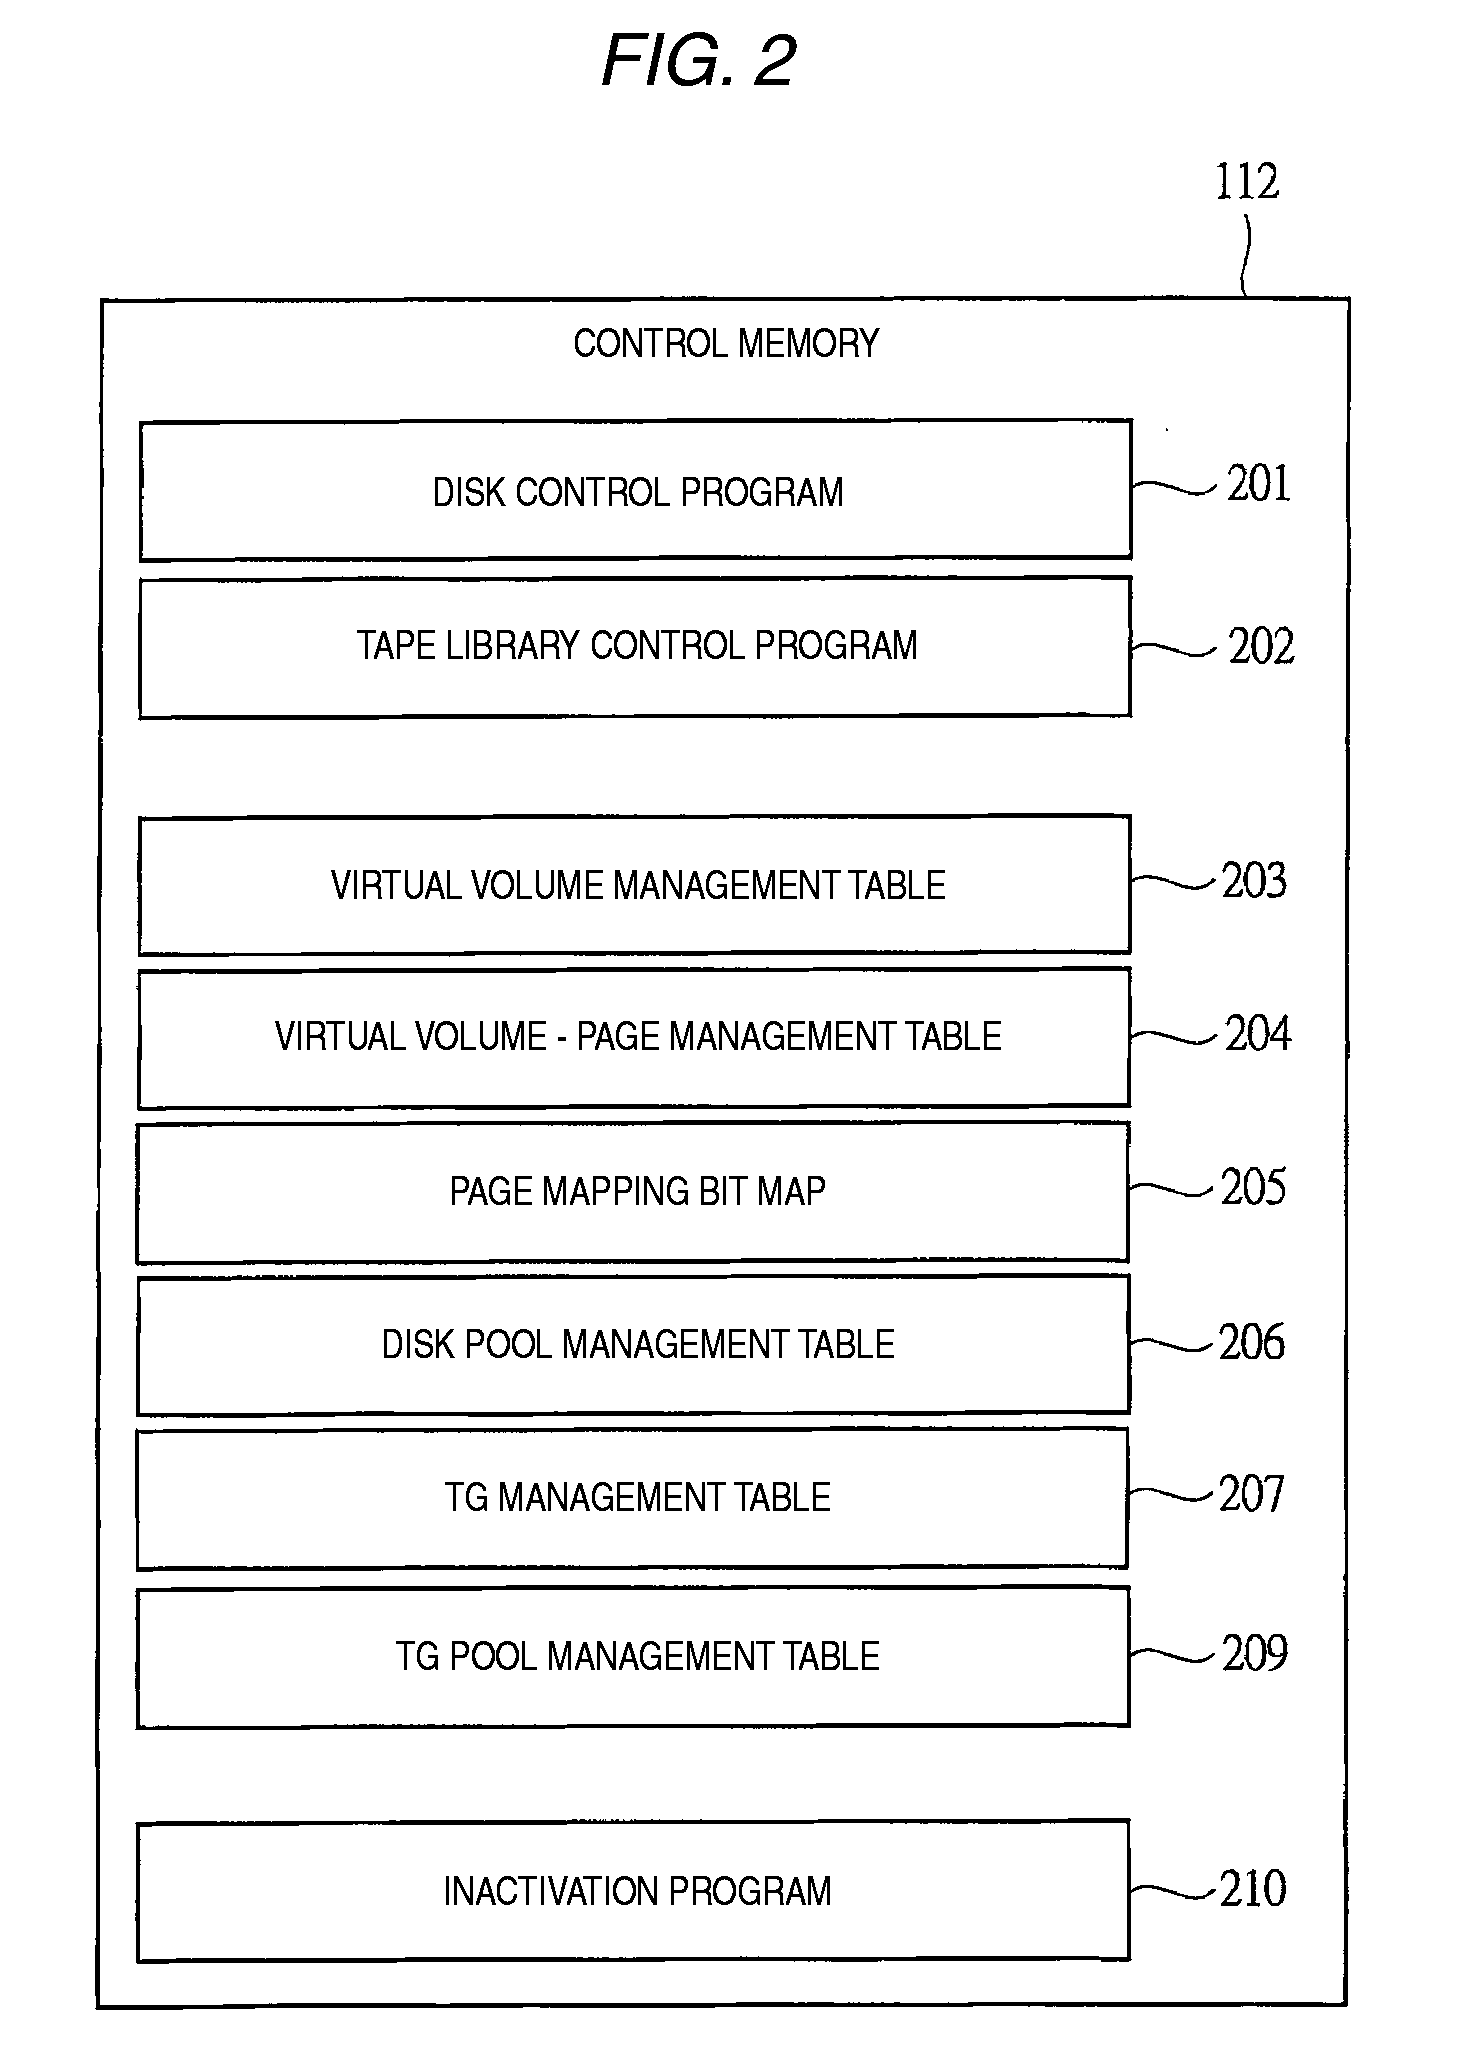 Data archive system